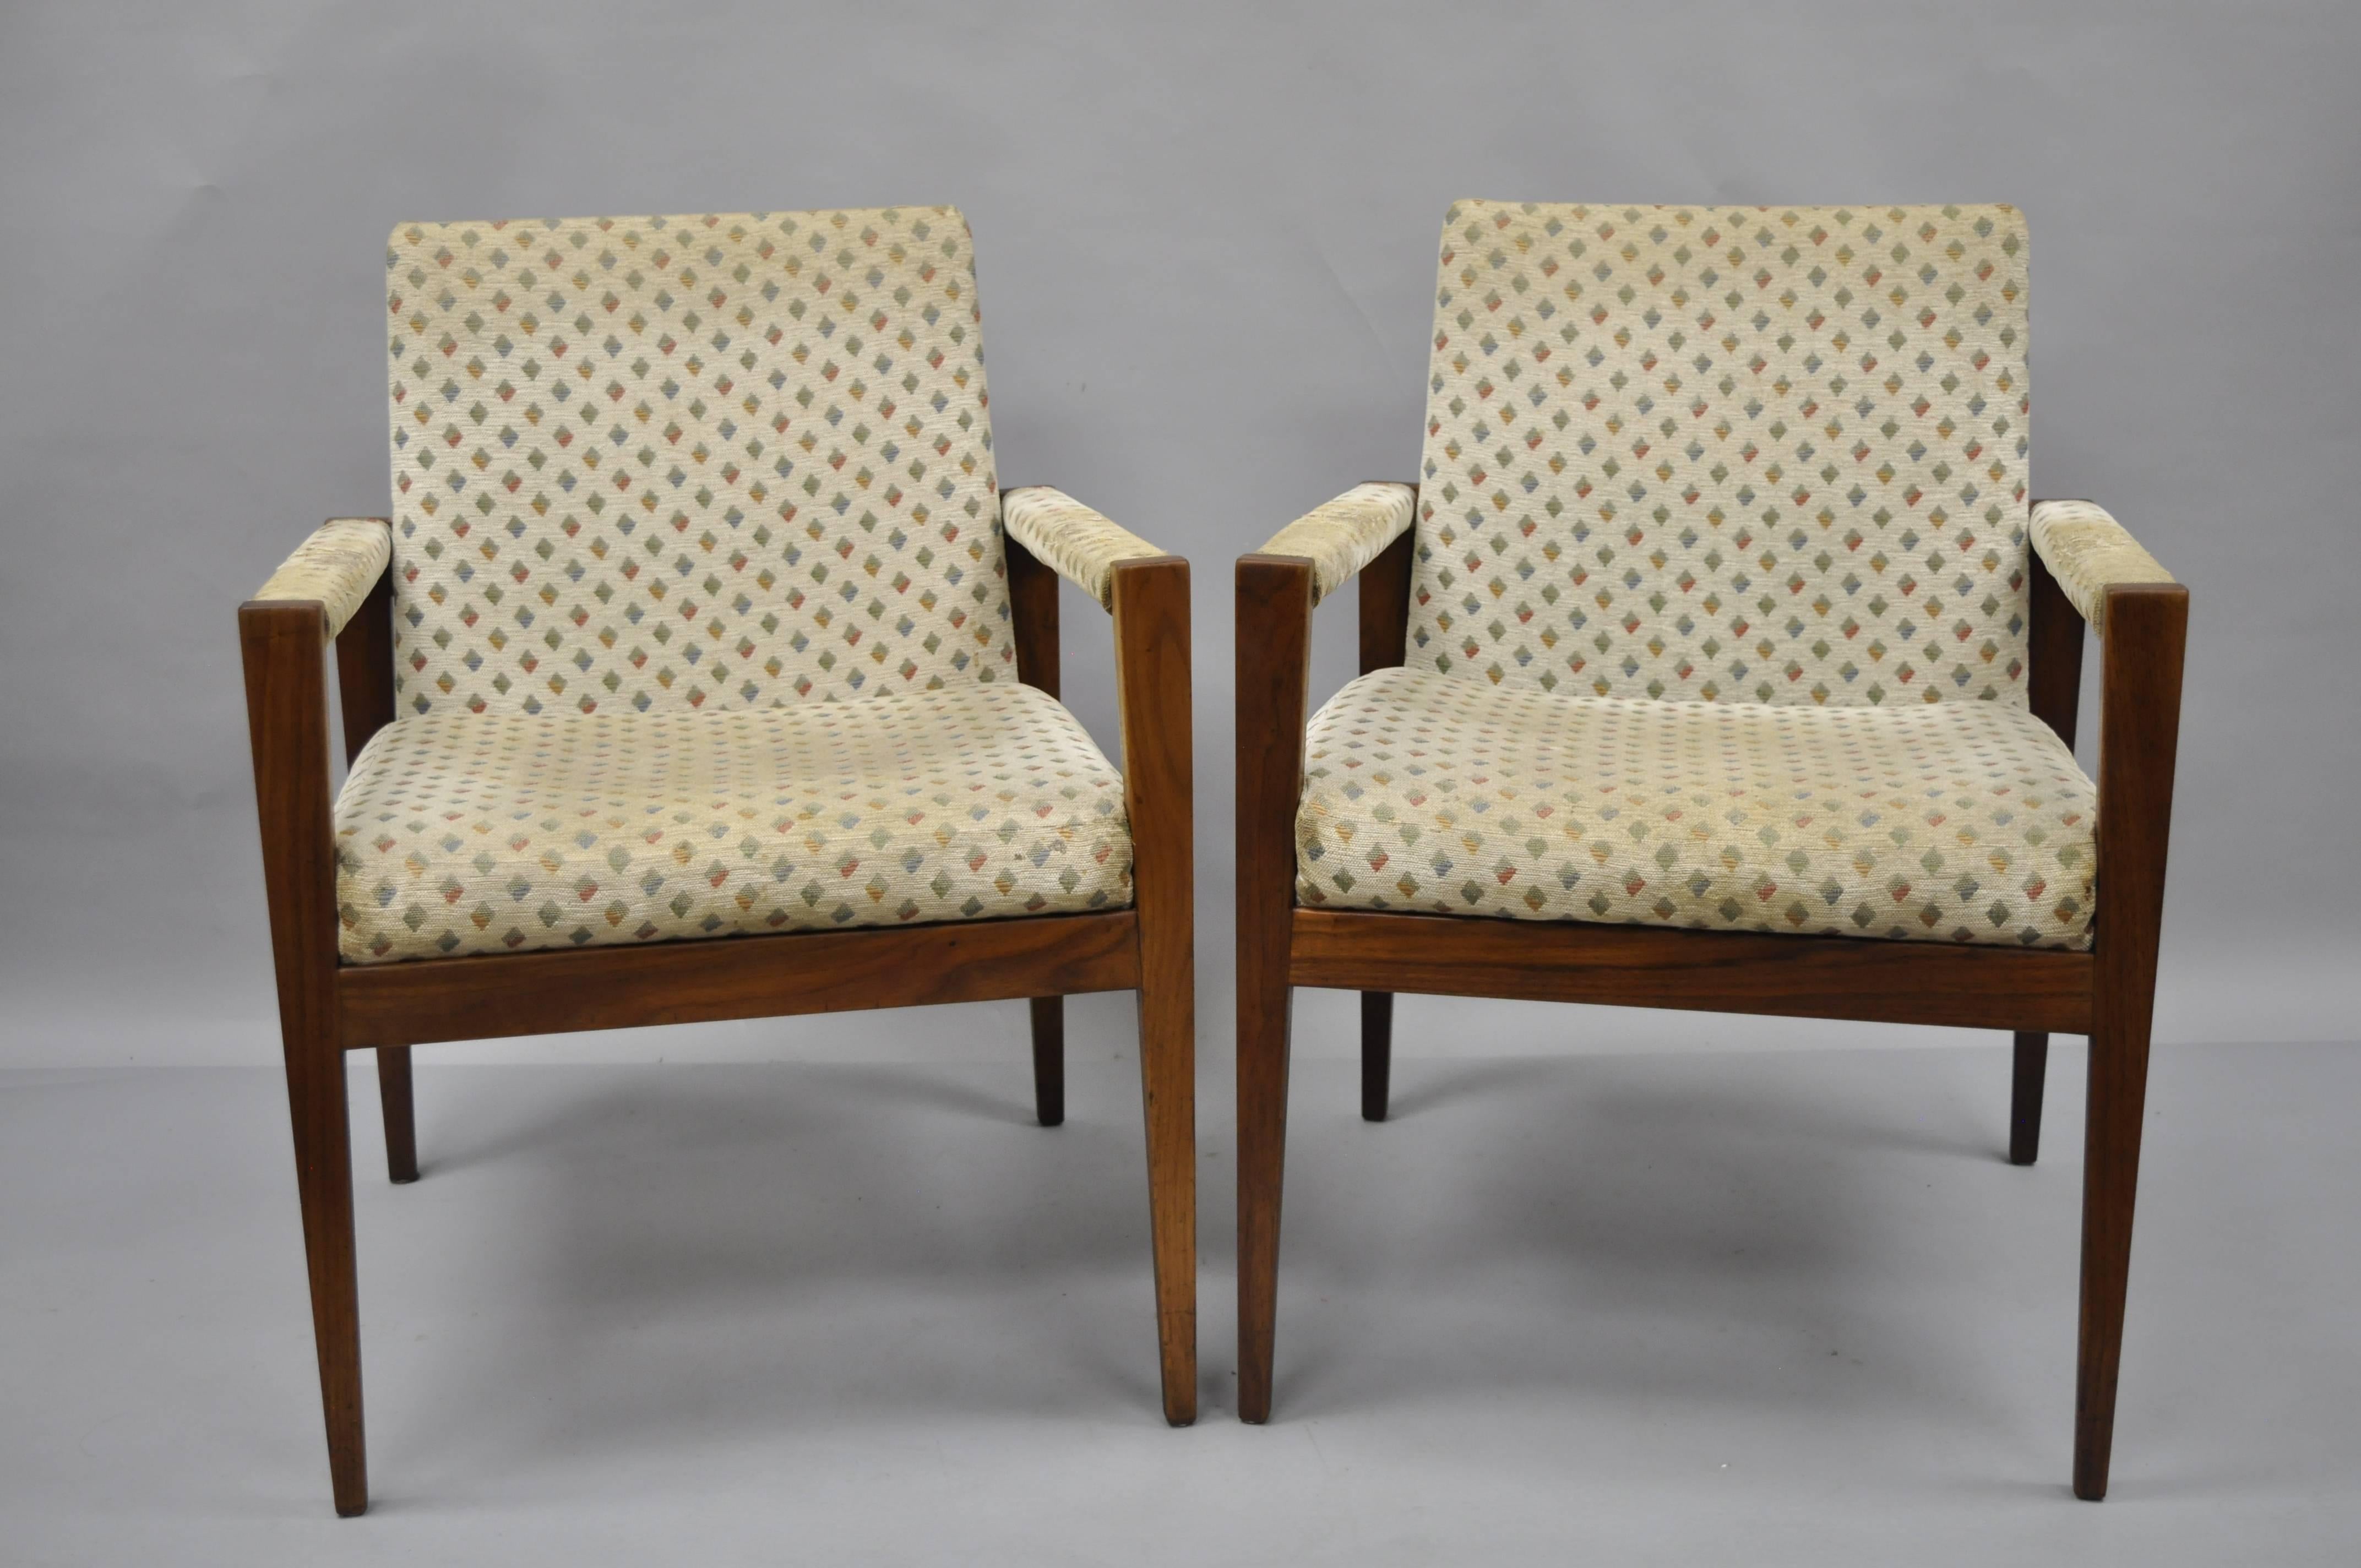 Pair of vintage Jens Risom walnut armchairs manufactured by Gaylord Brothers. These Mid-Century Modern chairs feature solid wood frames, beautiful wood grain, sleek tapered legs, upholstered armrests, and clean Modernist lines. Gaylord Brothers